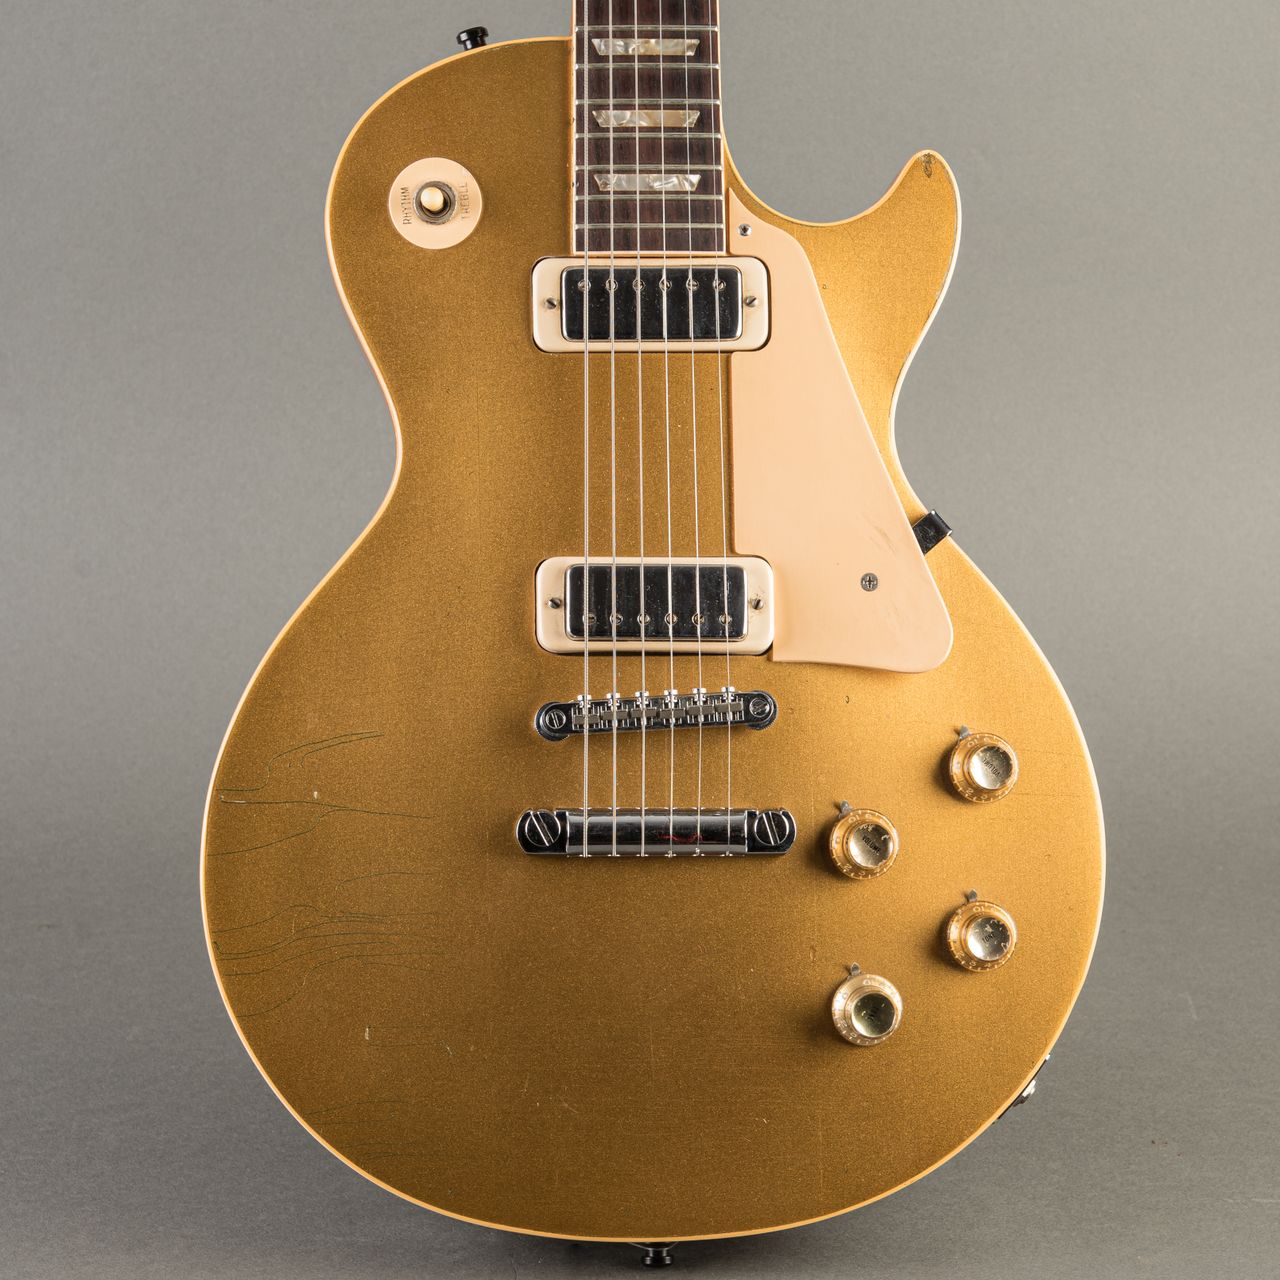 Gibson Les Paul Deluxe 1973, Gold Top | Carter Vintage Guitars